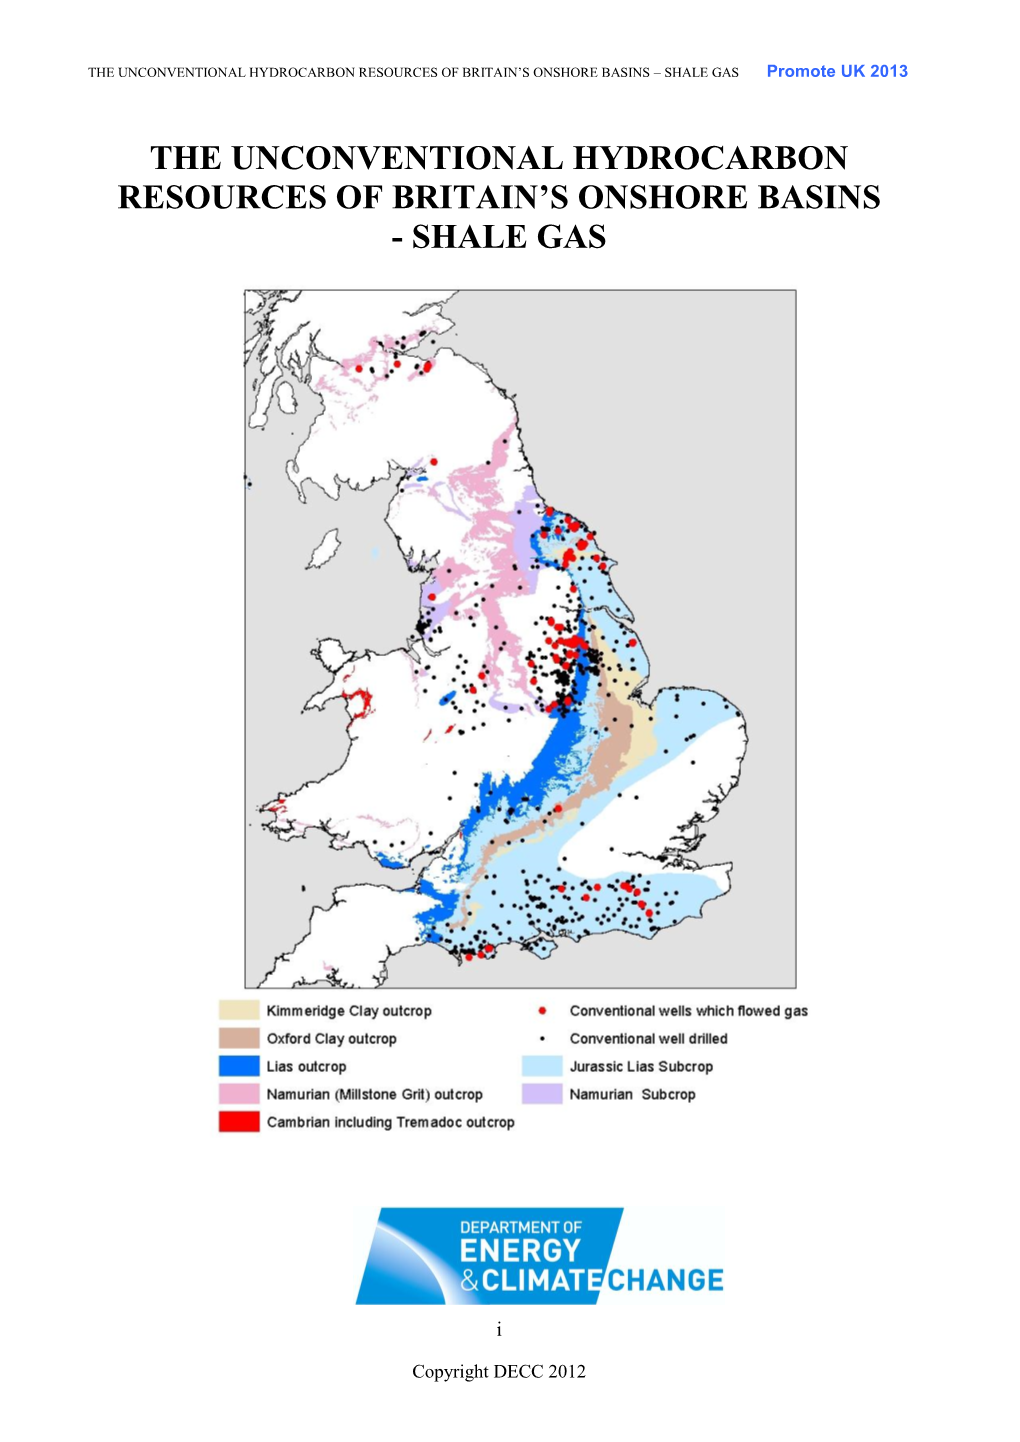 The Unconventional Hydrocarbon Resources of Britain's Onshore Basins